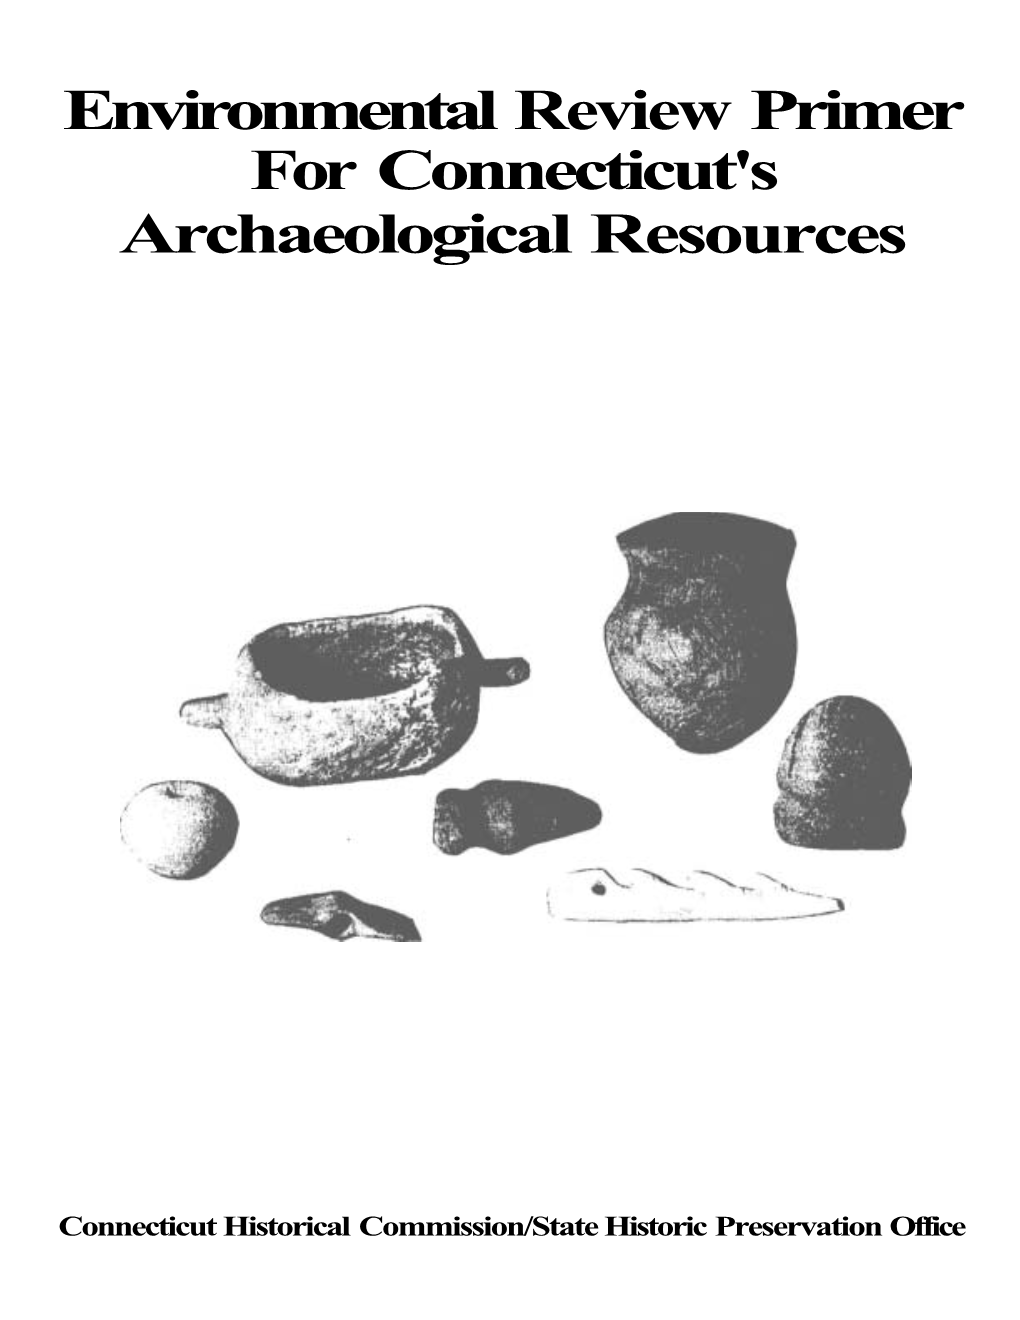 Environmental Review Primer for Connecticut's Archaeological Resources